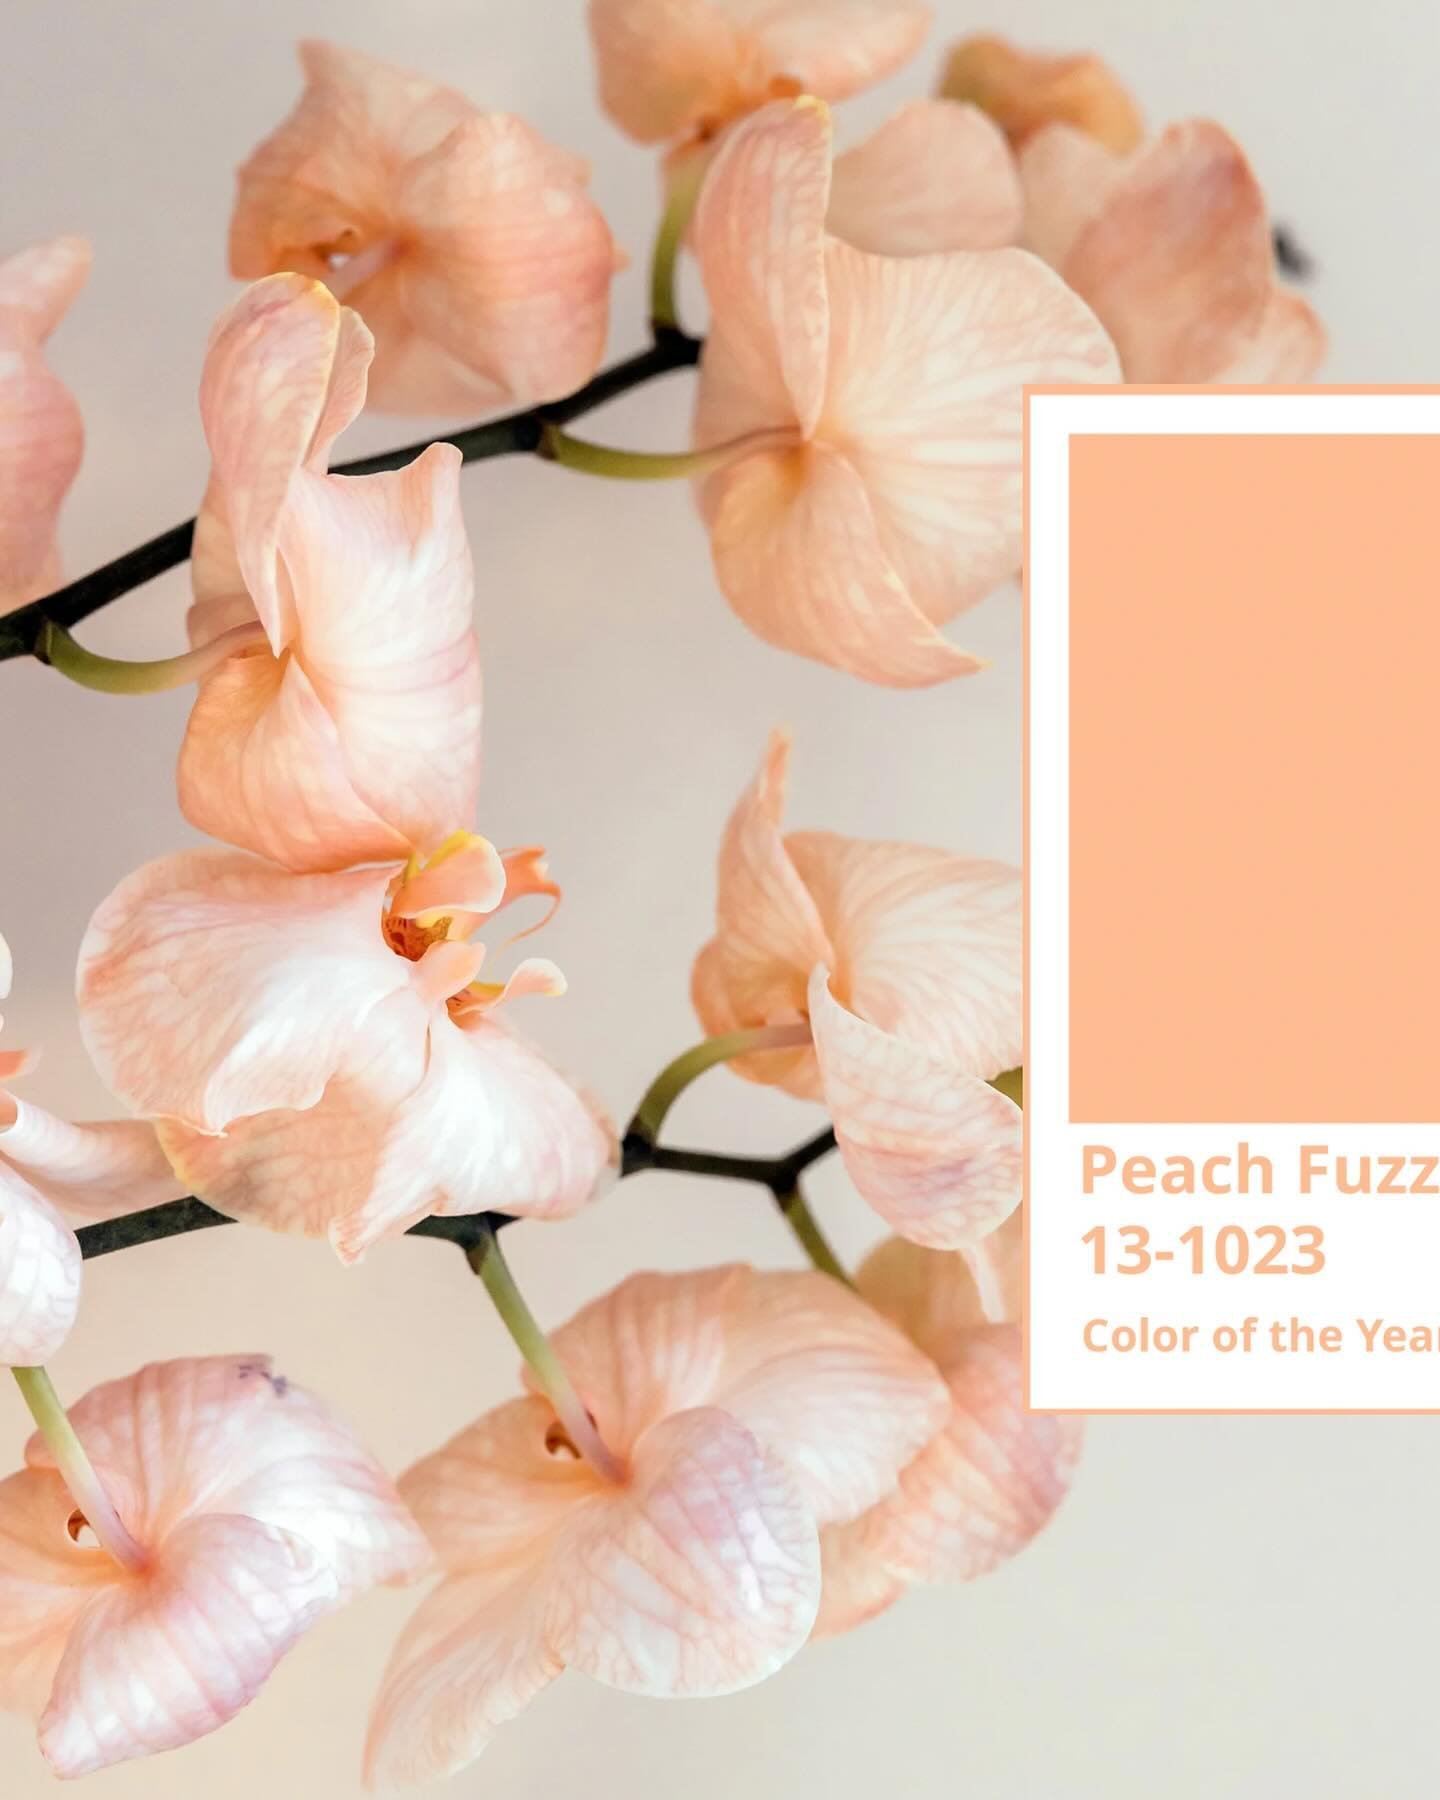 If you&rsquo;re looking to bring some spring vibes into your online world check out the Pantone color of the year &lsquo;Peach Fuzz&rsquo;&rsquo; (HEX #FFBE98).

&ldquo;Subtly sensual, Peach Fuzz is a heartfelt peach hue bringing a feeling of kindnes